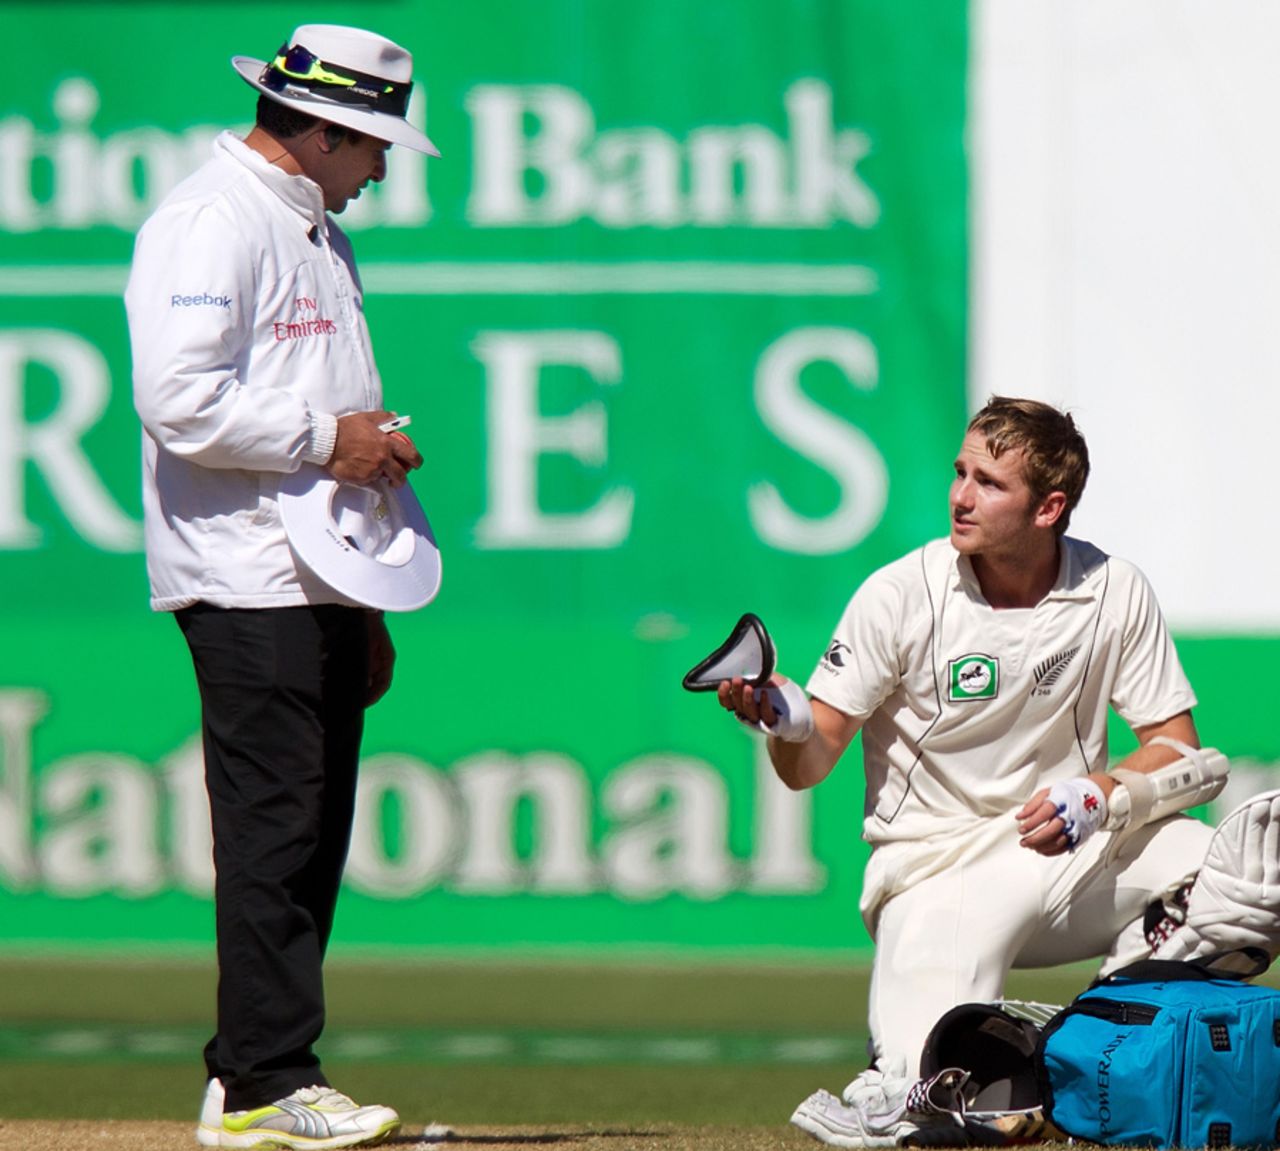 Kane Williamson shows umpire Aleem Dar his damaged box, New Zealand v South Africa, 3rd Test, Wellington, 5th day, March 27, 2012